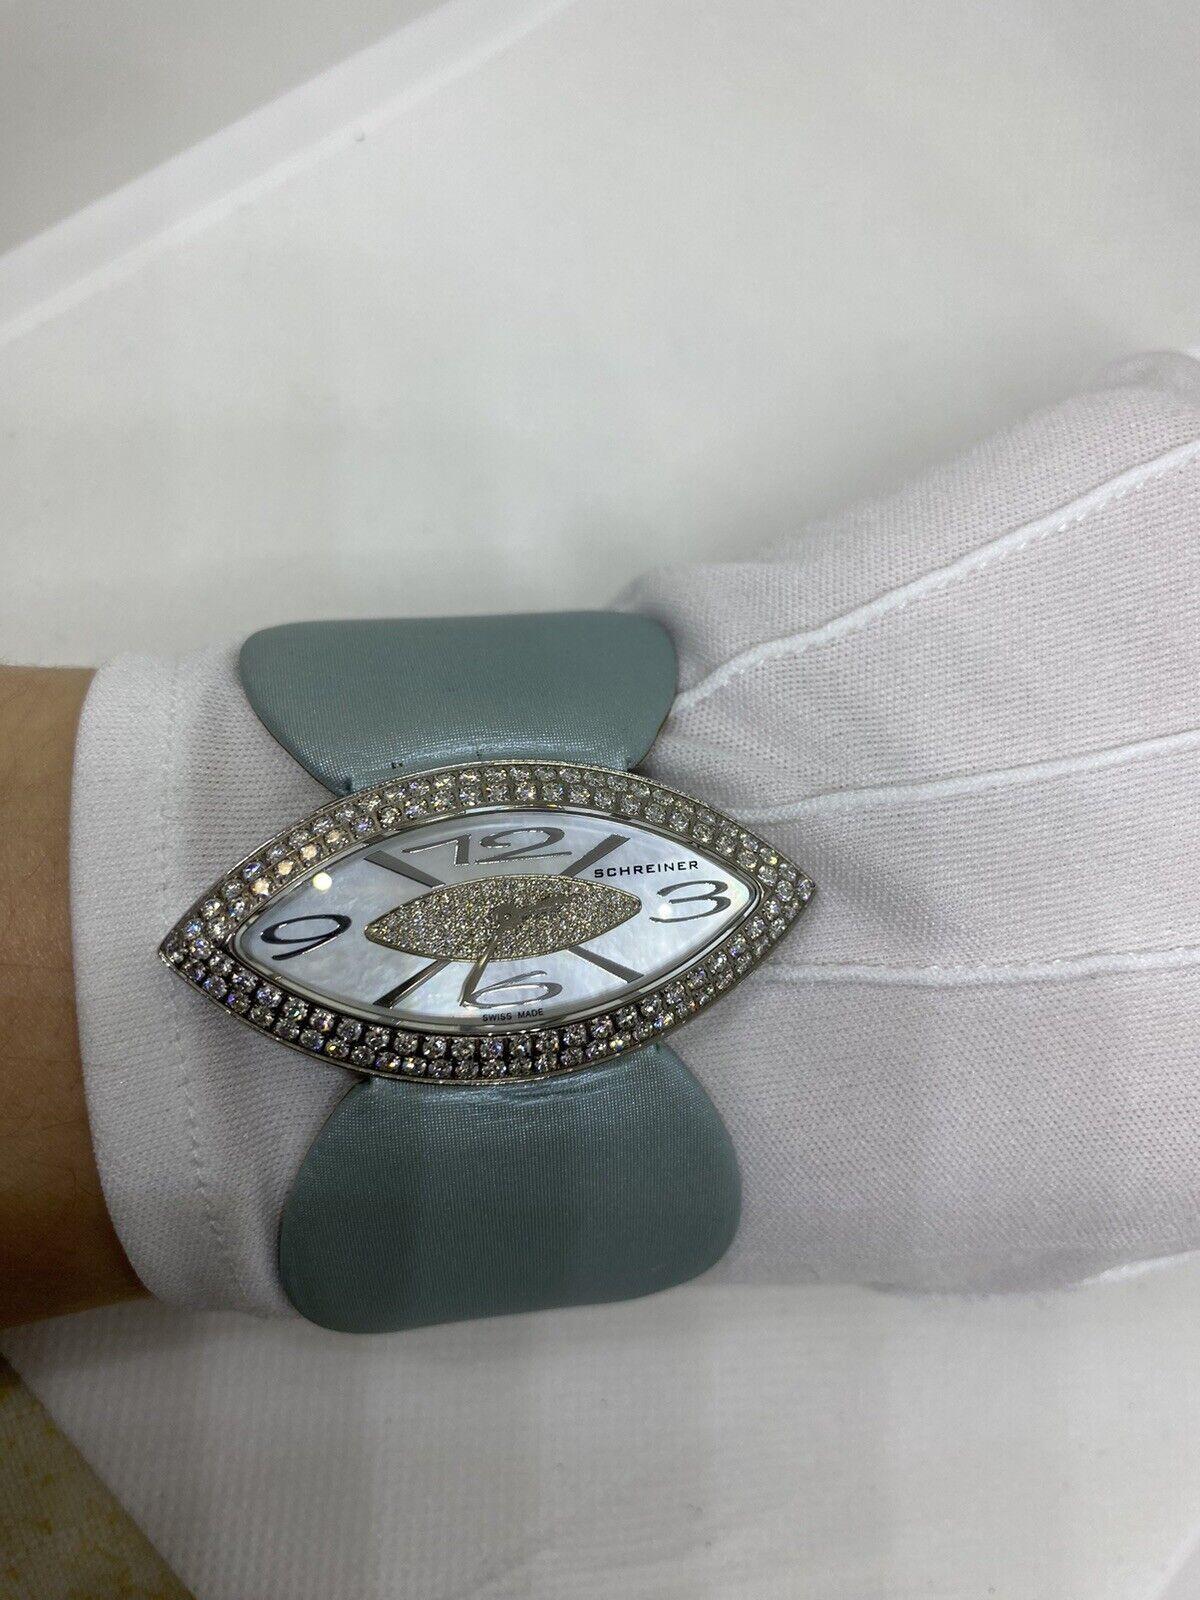 Schreiner Marquise Haute Joaillerie watch In Good Condition For Sale In Forest Hills, NY